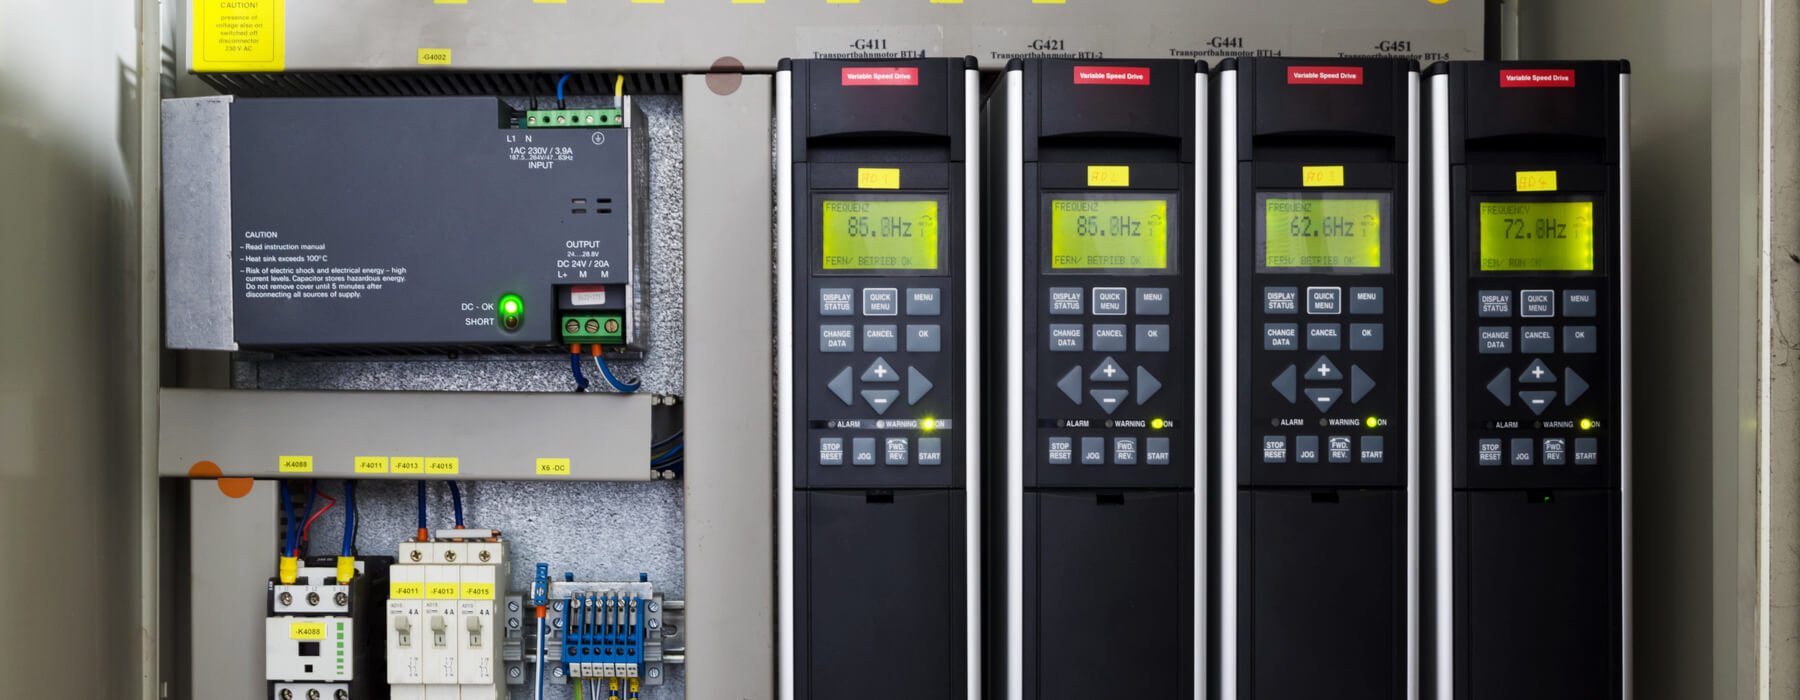 Siemens Low voltage Variable Frequency Drives Overview